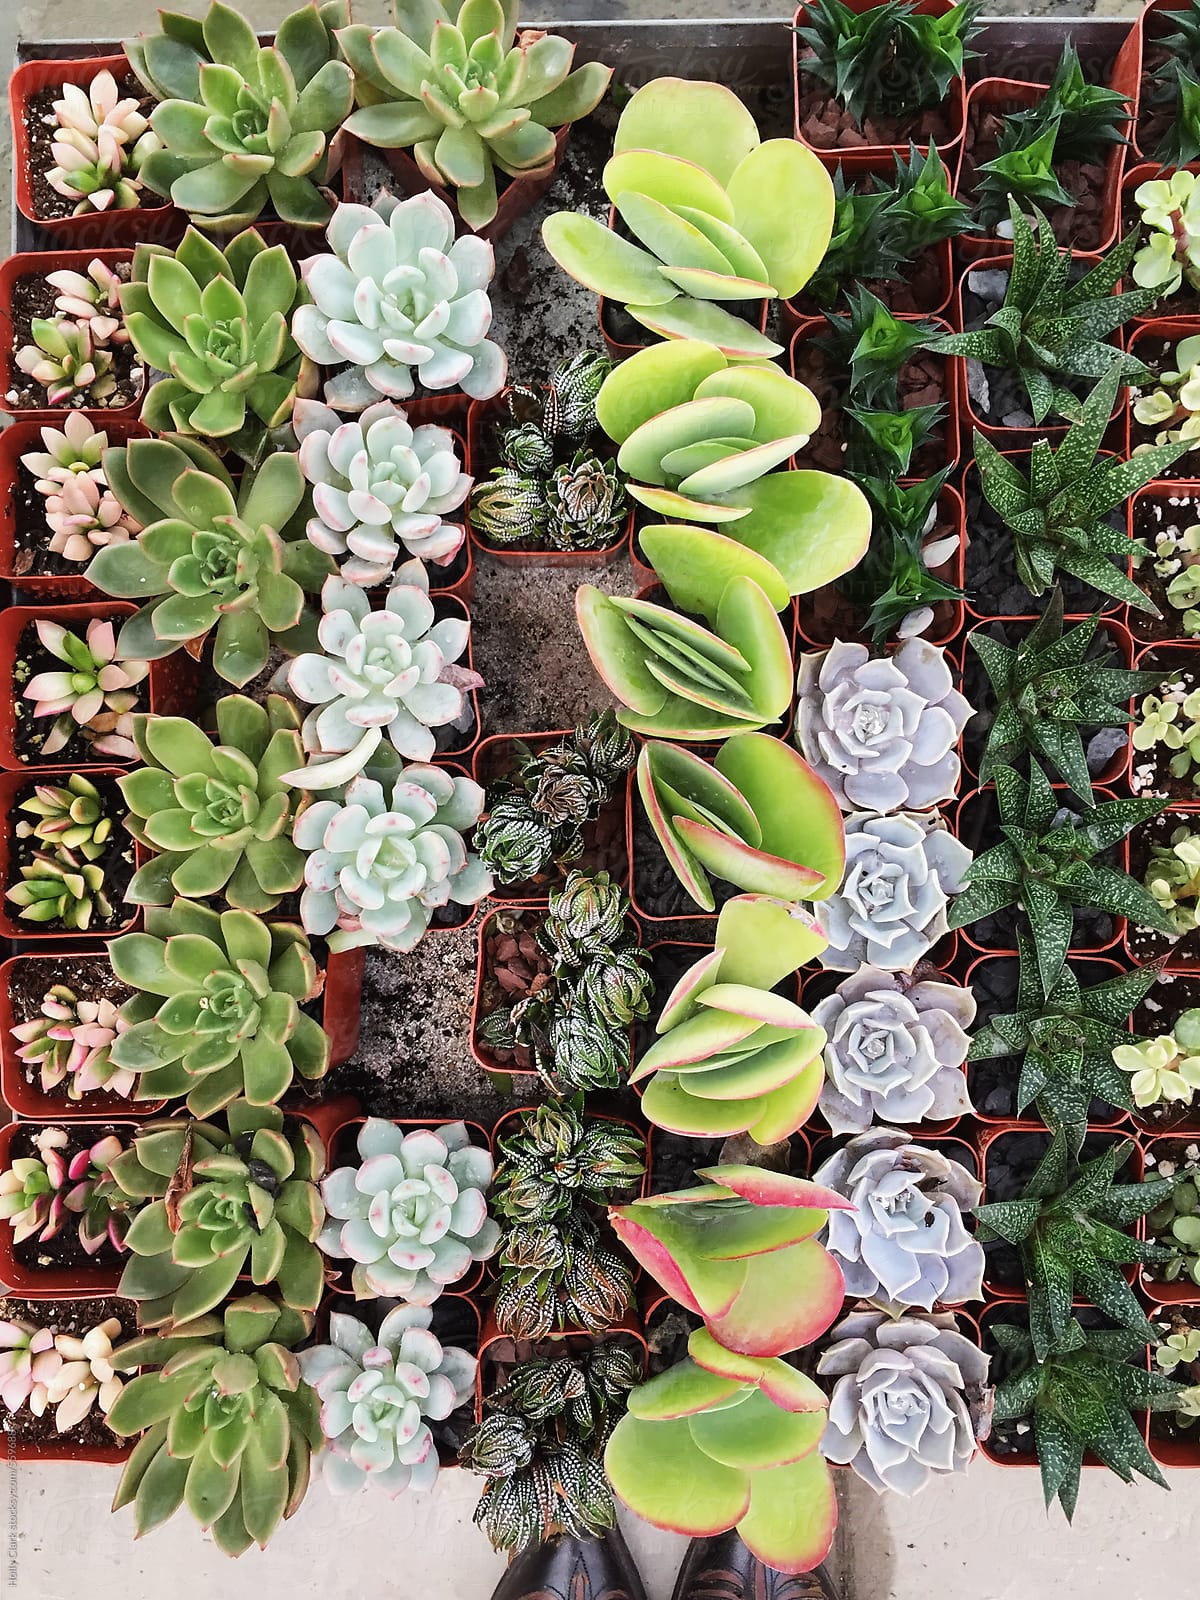 An assortment of succulents lined up in tiny plastic pots for sale